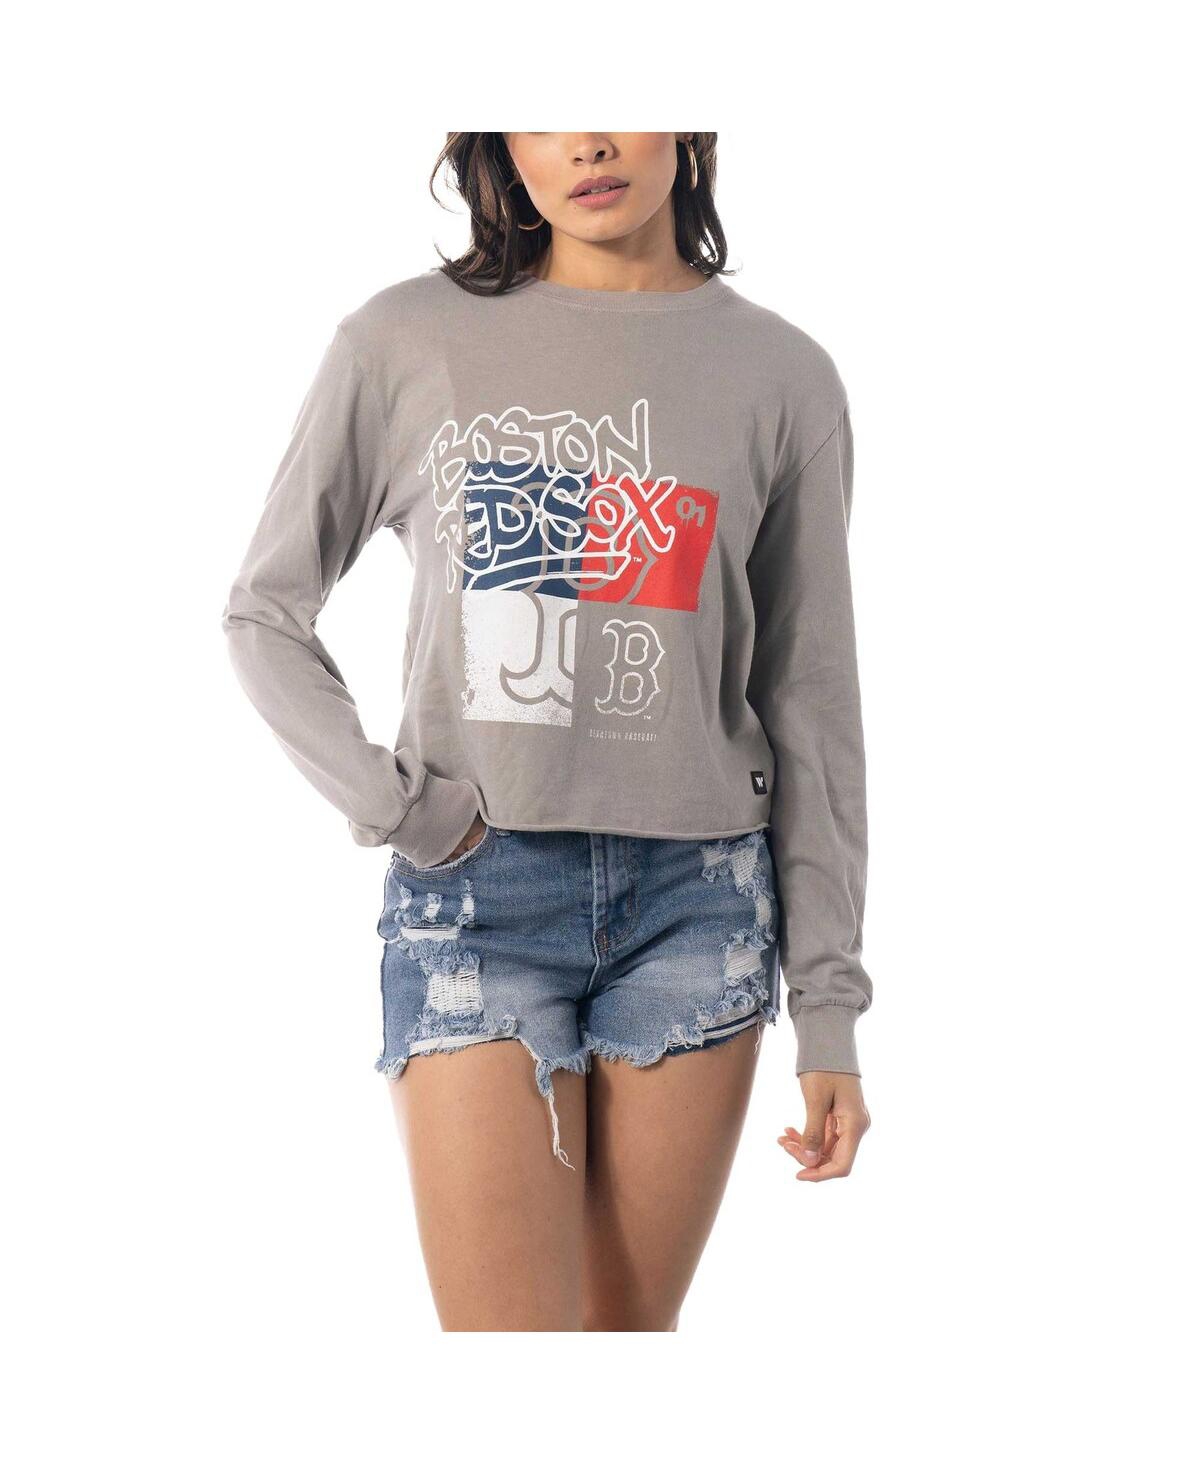 THE WILD COLLECTIVE WOMEN'S THE WILD COLLECTIVE GRAY BOSTON RED SOX CROPPED LONG SLEEVE T-SHIRT